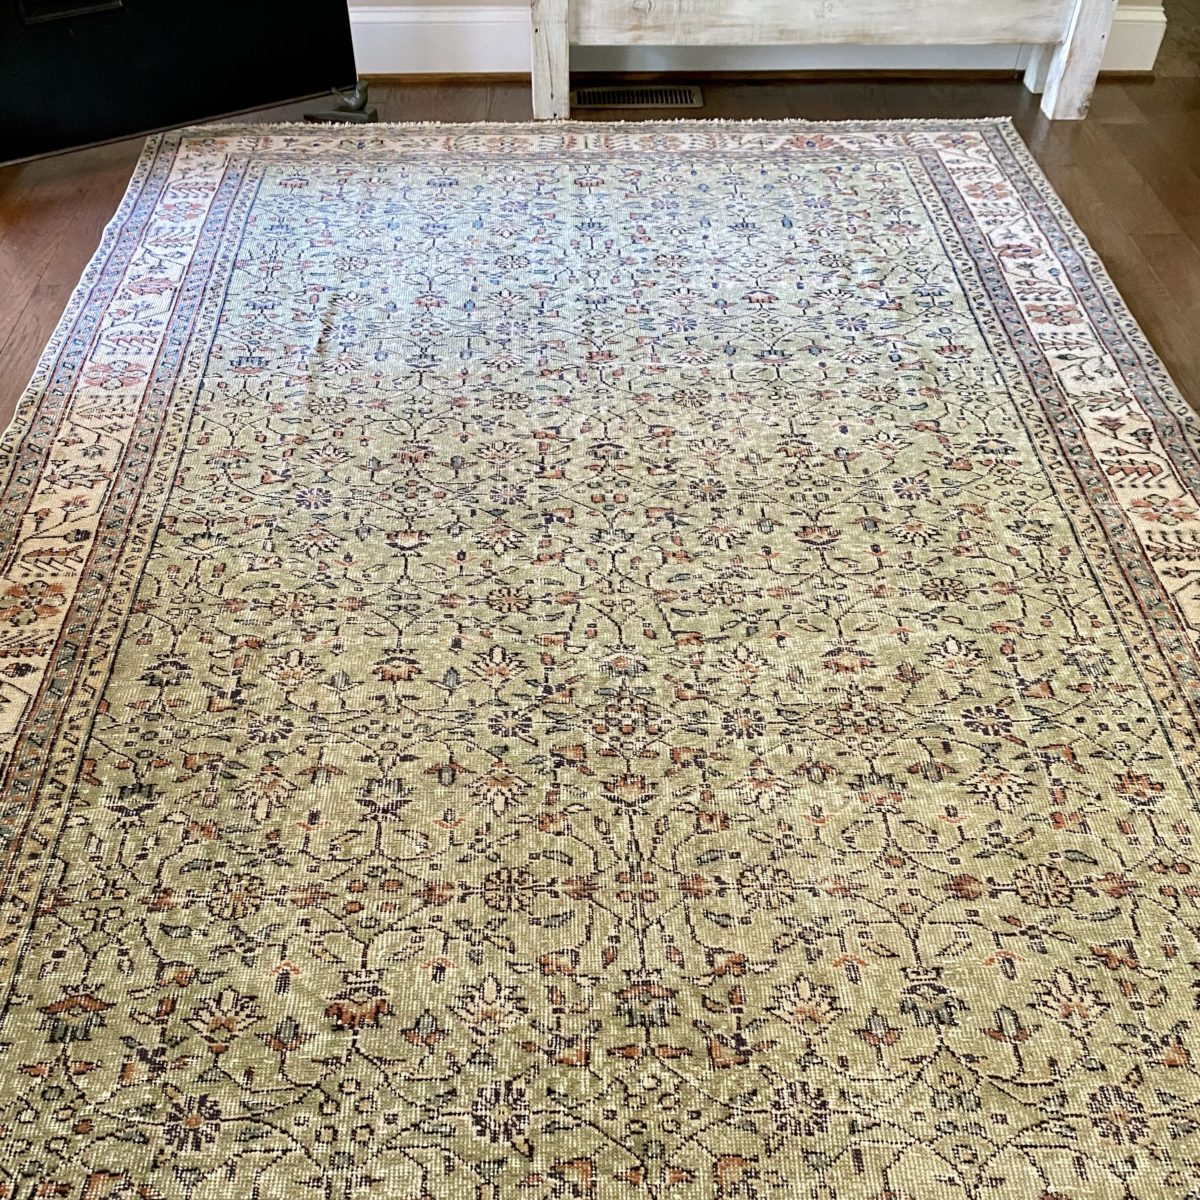 Revival rug laid out on the foyer floor.